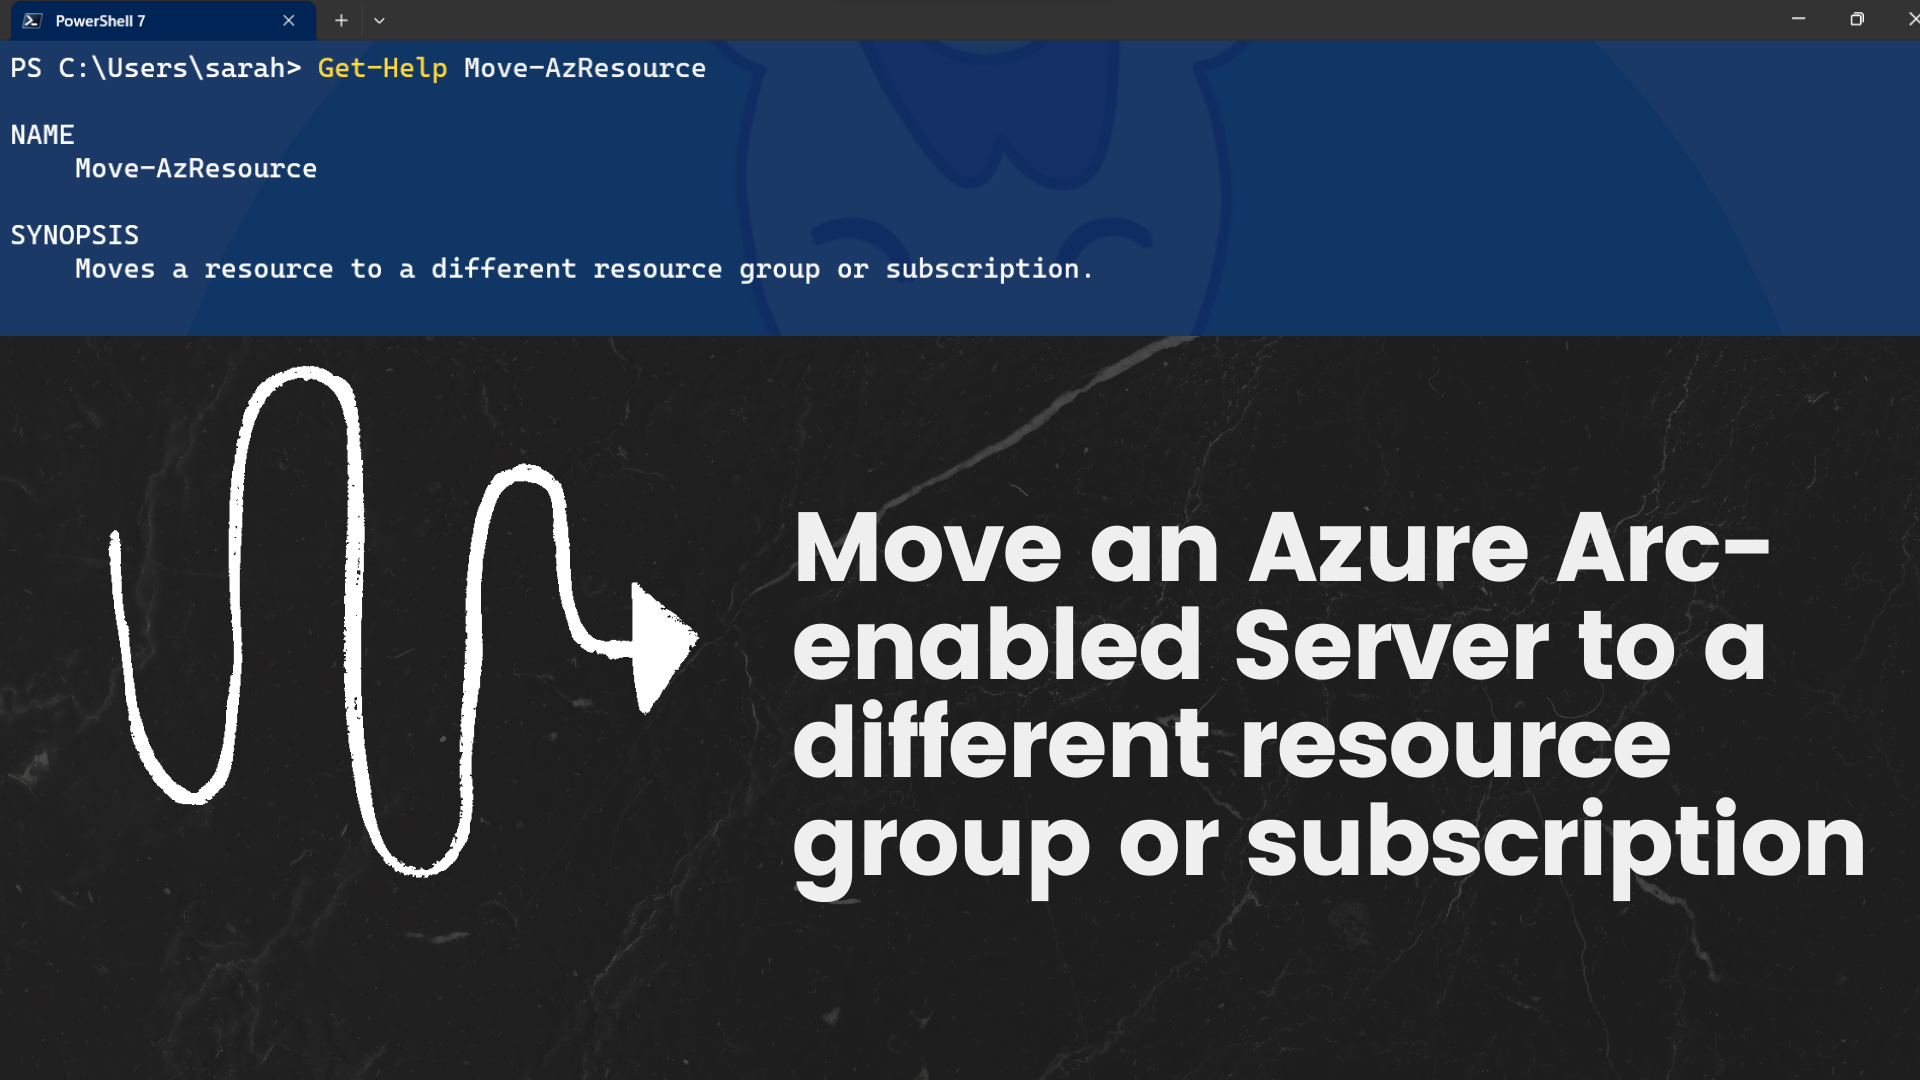 Move an Azure Arc-enabled Server to a different resource group or subscription